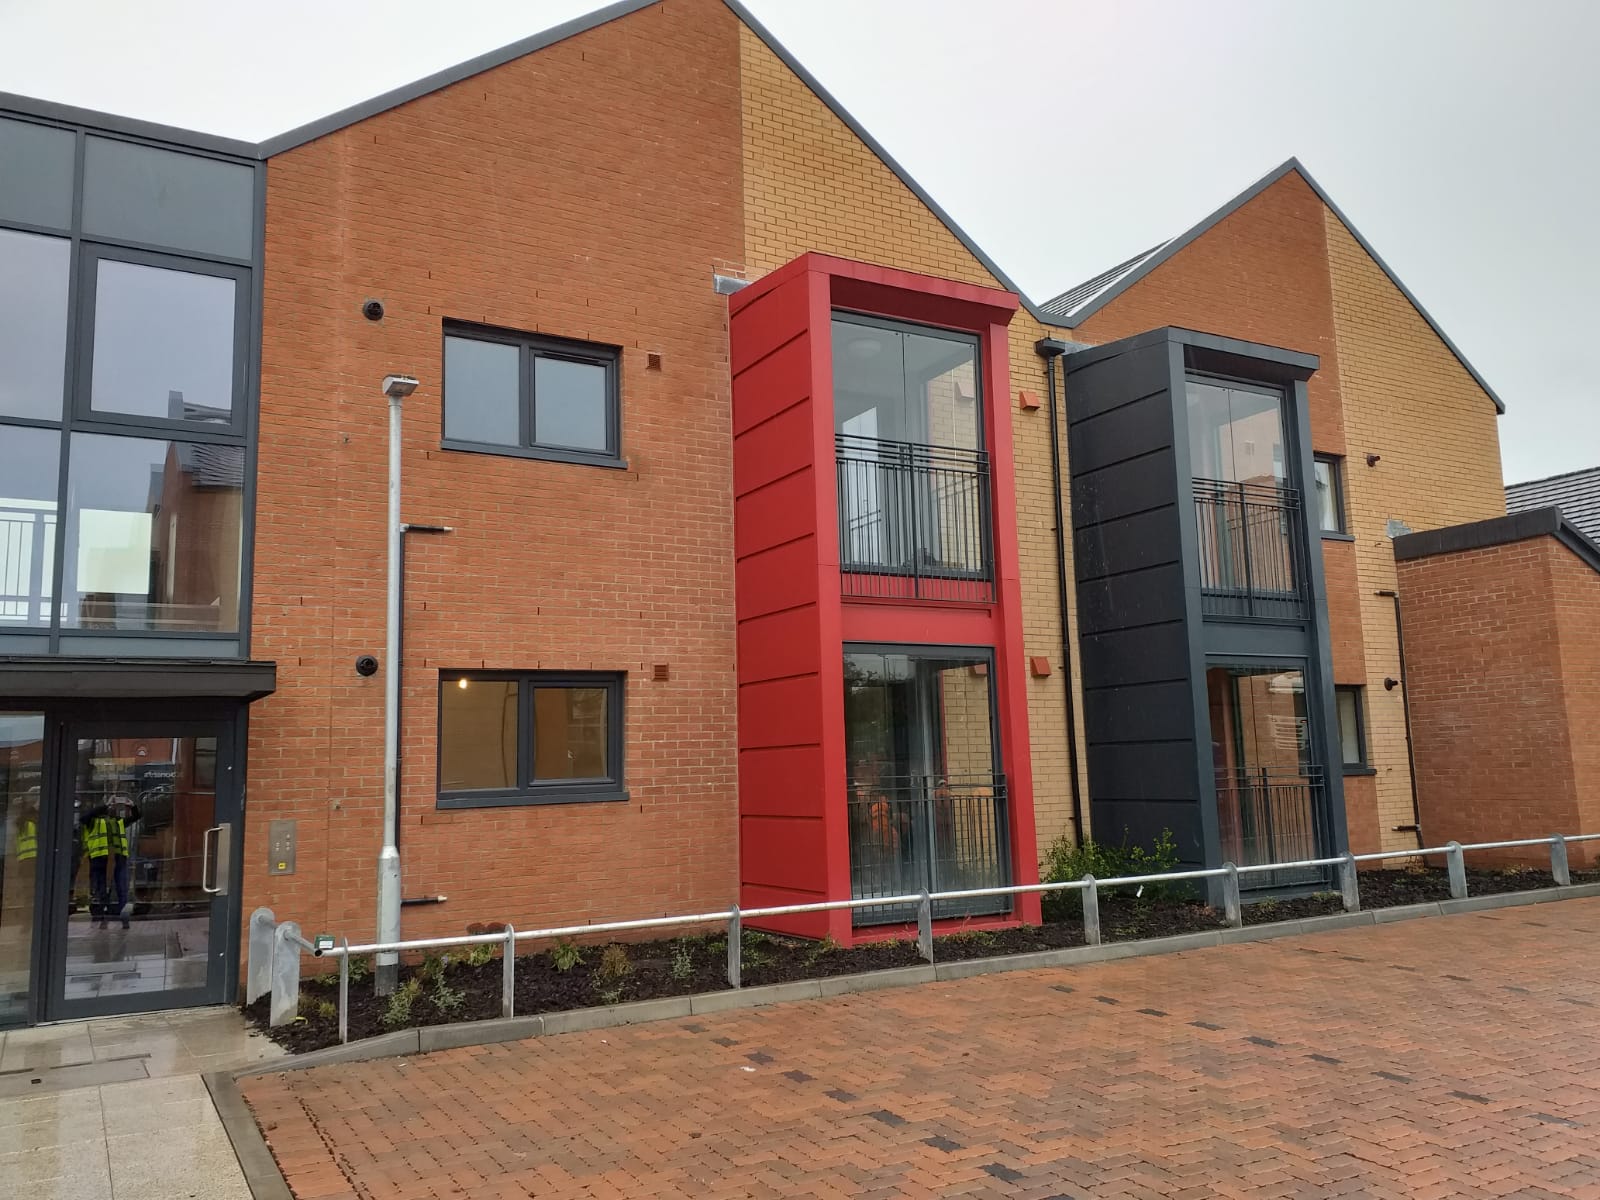 Cassiltoun delivers first new homes in 15 years